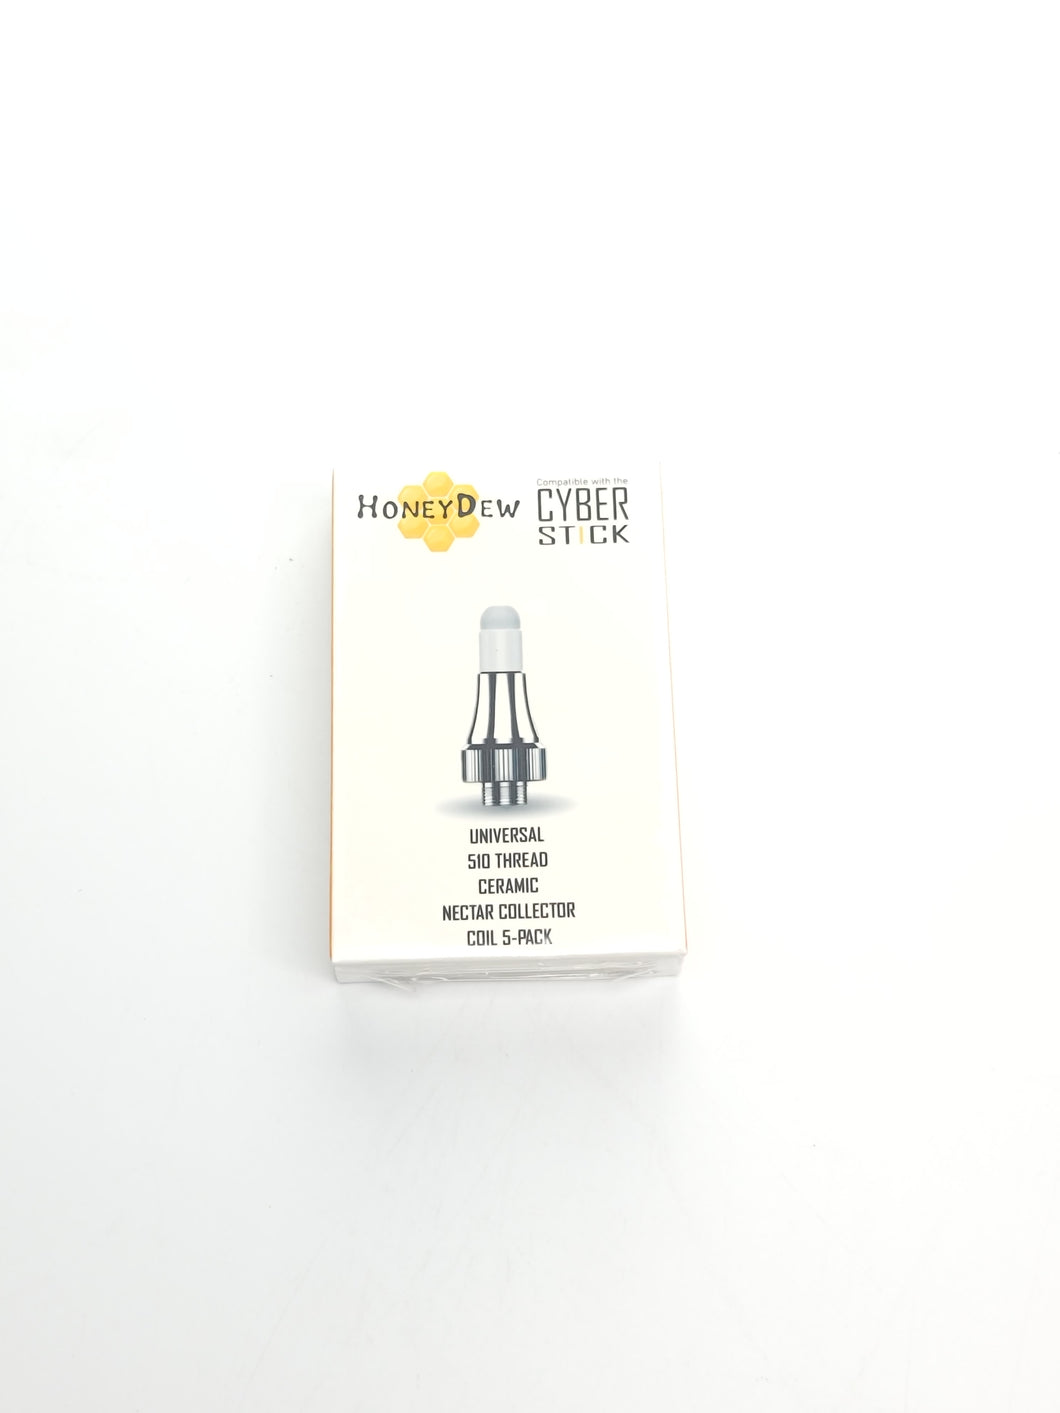 Cyber Stick Nectar Collector Replacement Coil (5 pack) **** NOT 510 THREAD ***